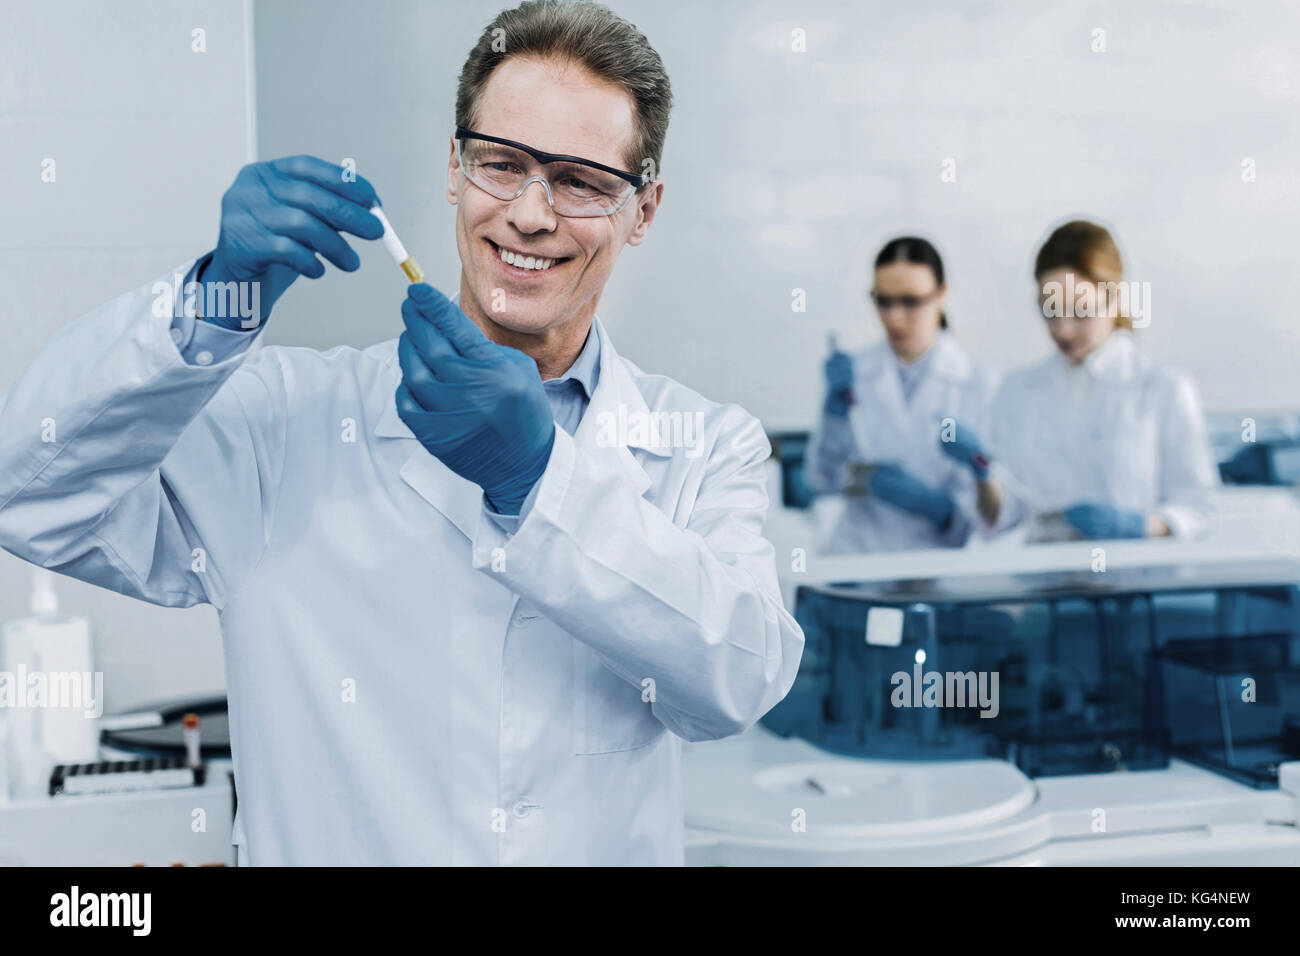 Happy professional scientist holding a test tube Stock Photo